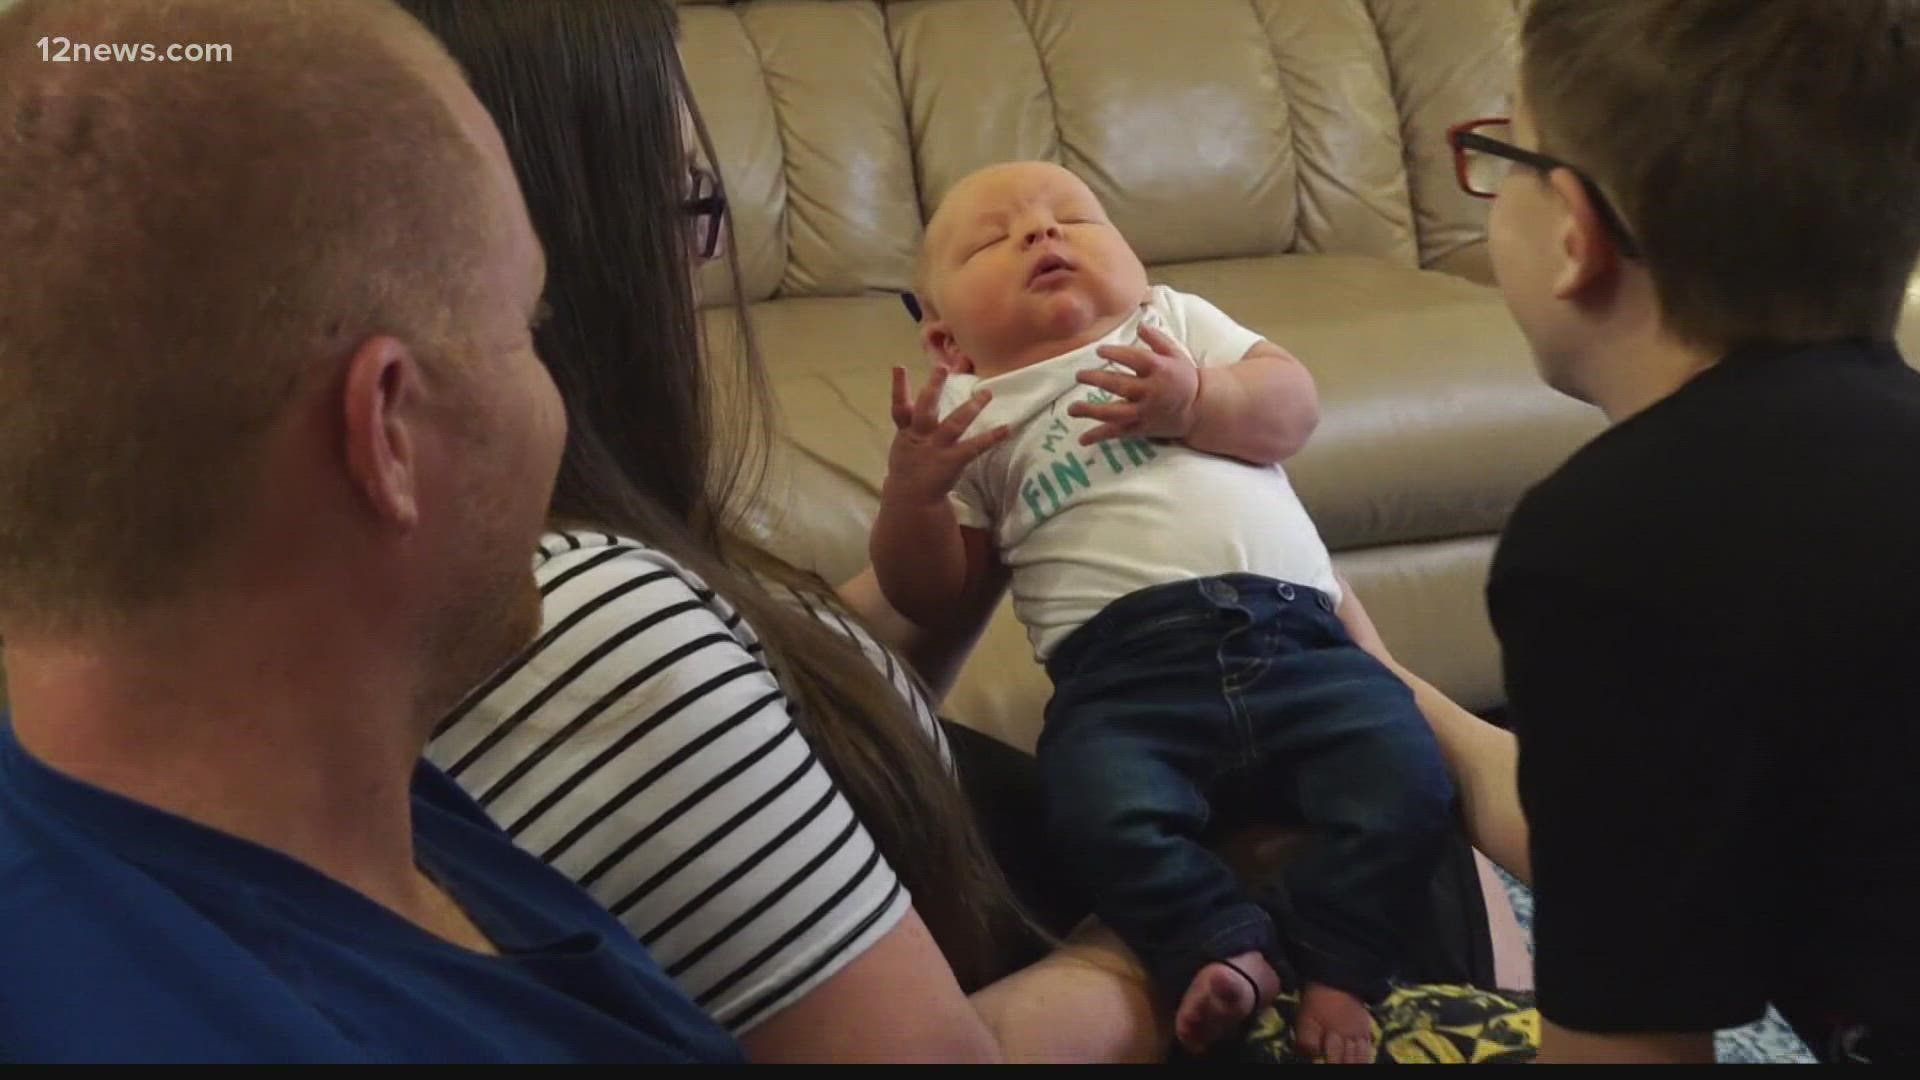 A Peoria family got a big surprise last week when their third child came out even larger than what doctors had expected.